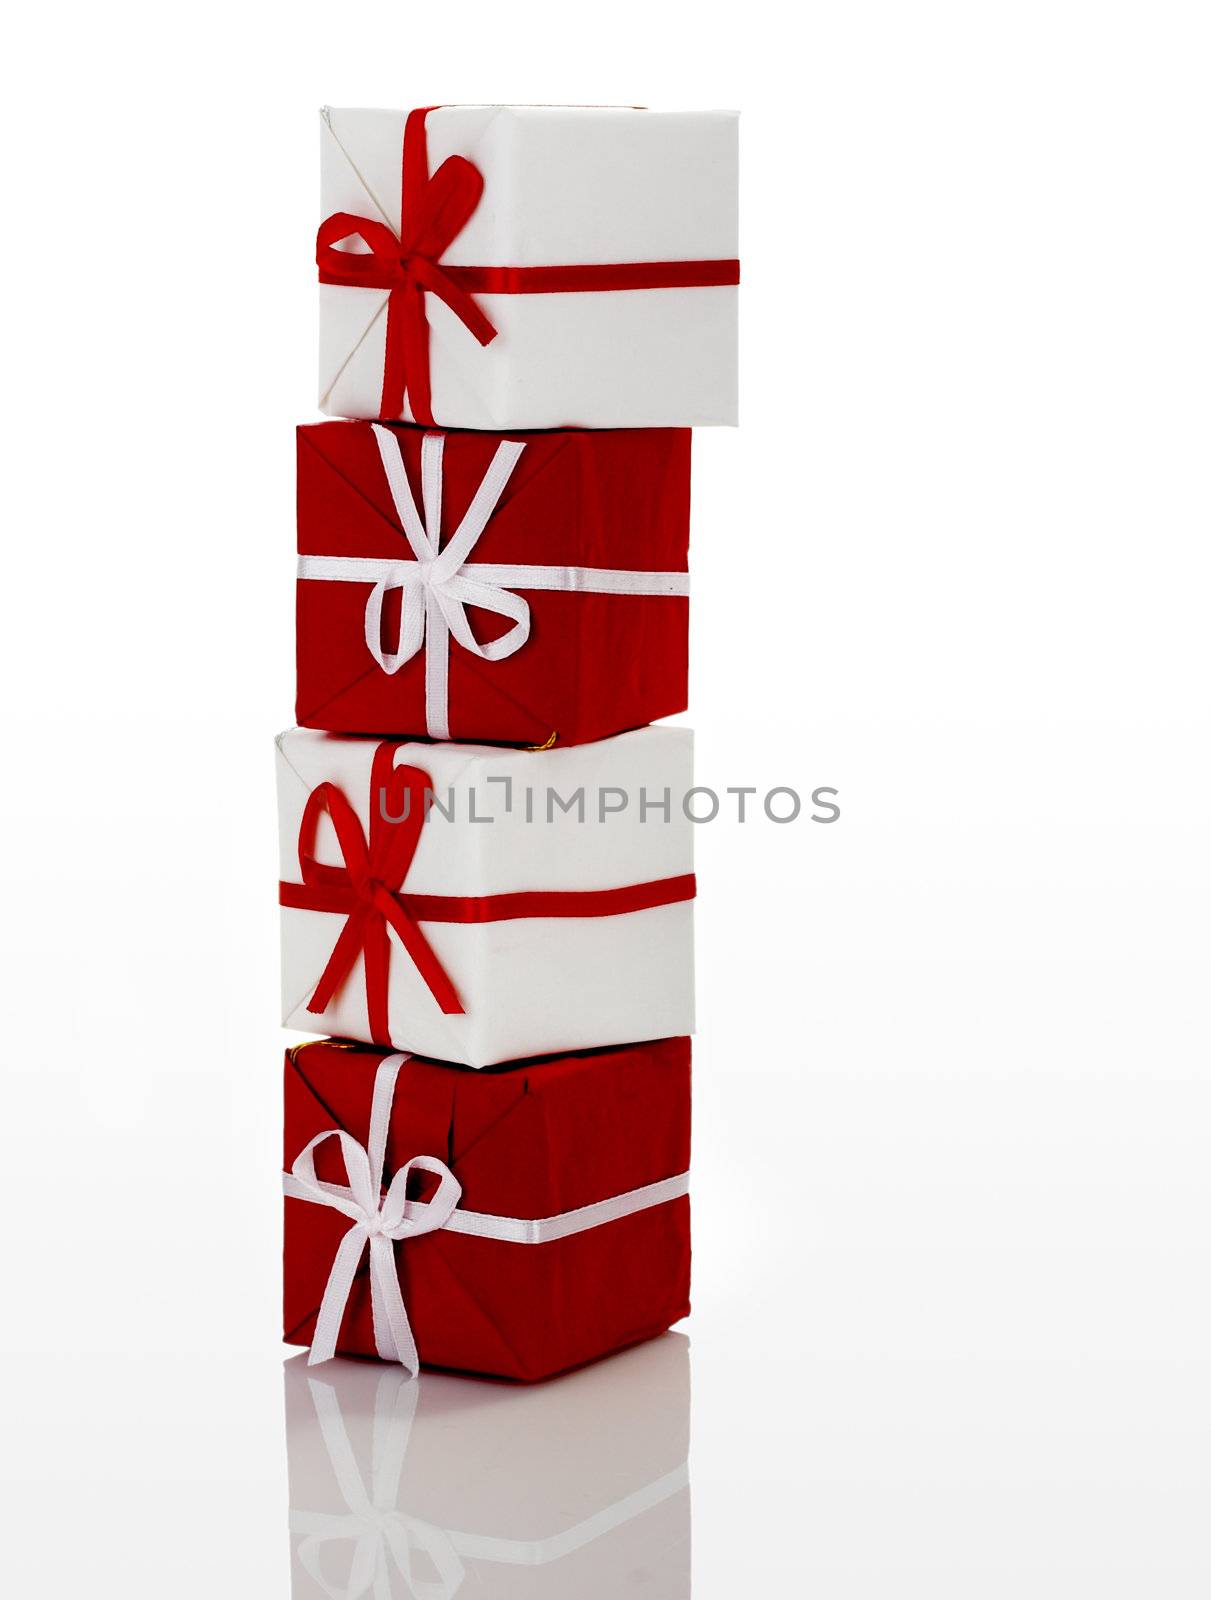 Gifts Boxes by Iko